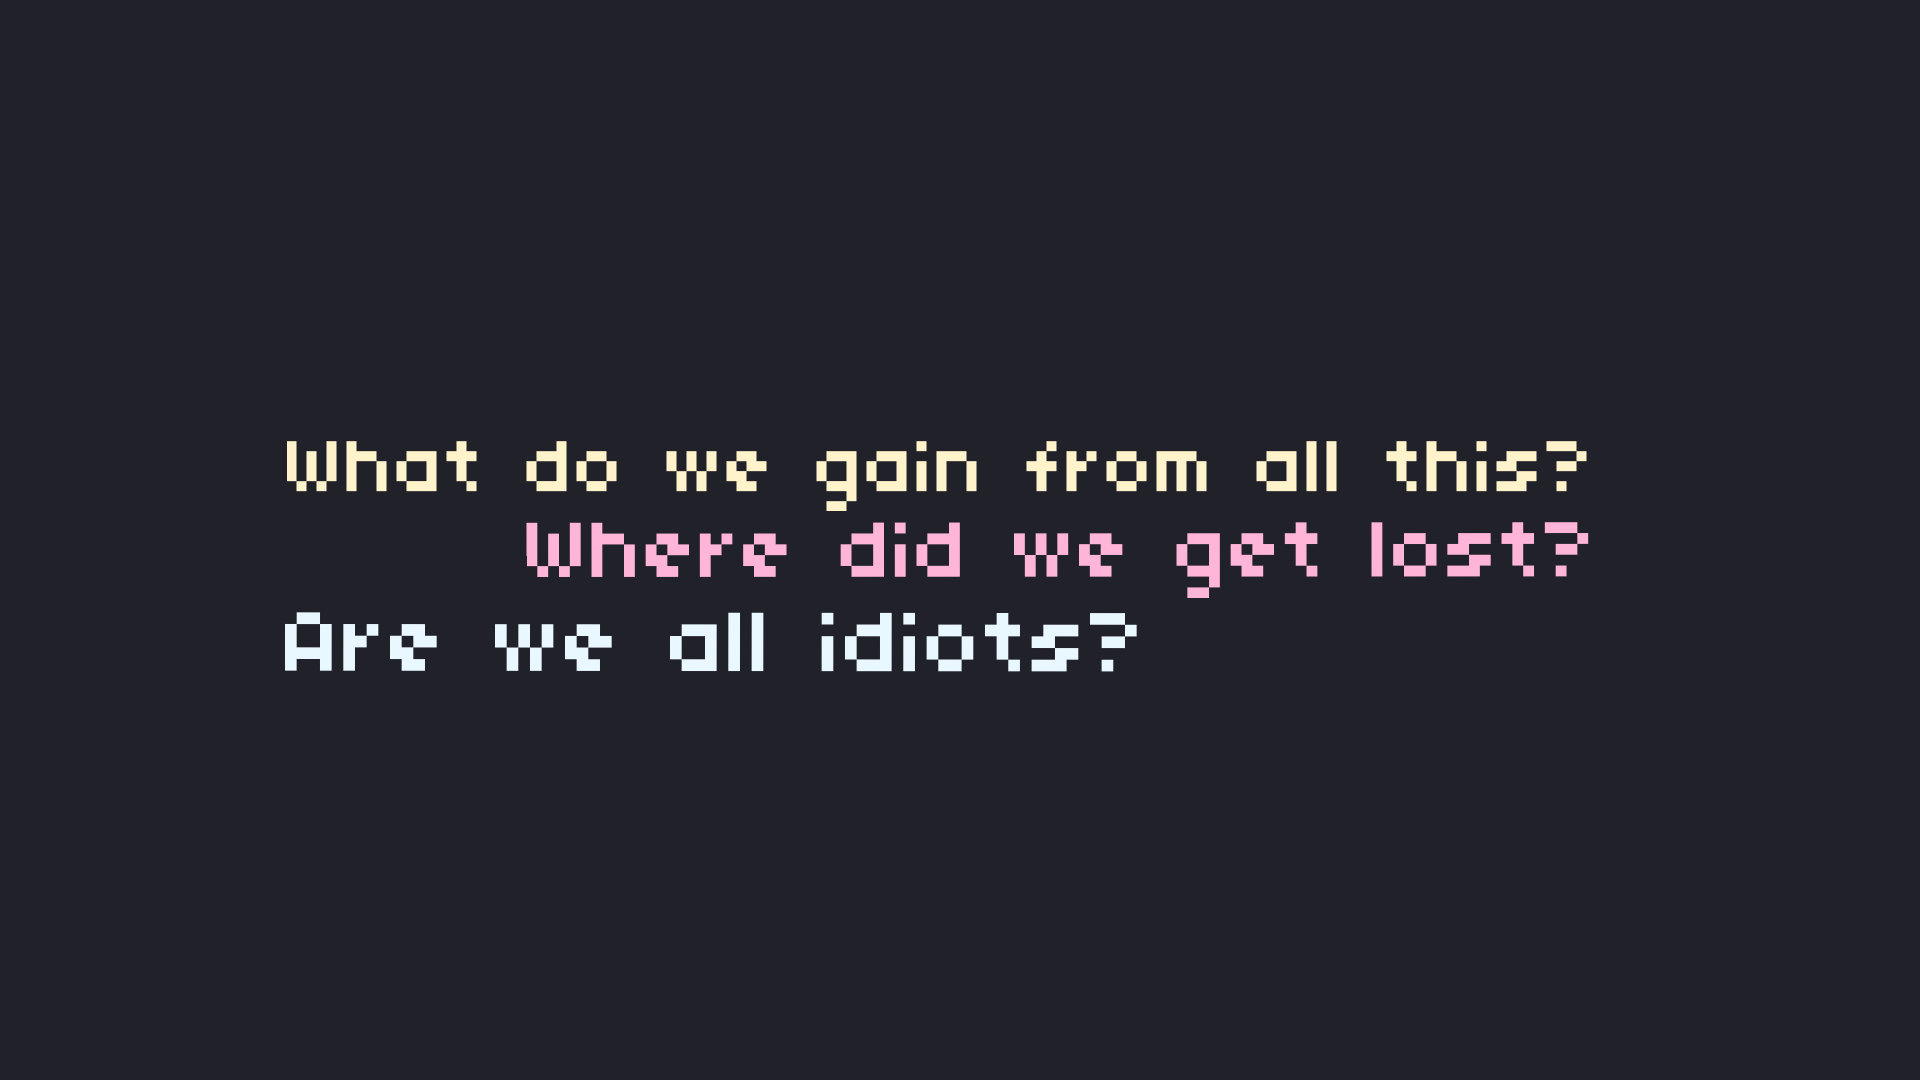 General 1920x1080 simple background minimalism quote pixel art text writing pixelated